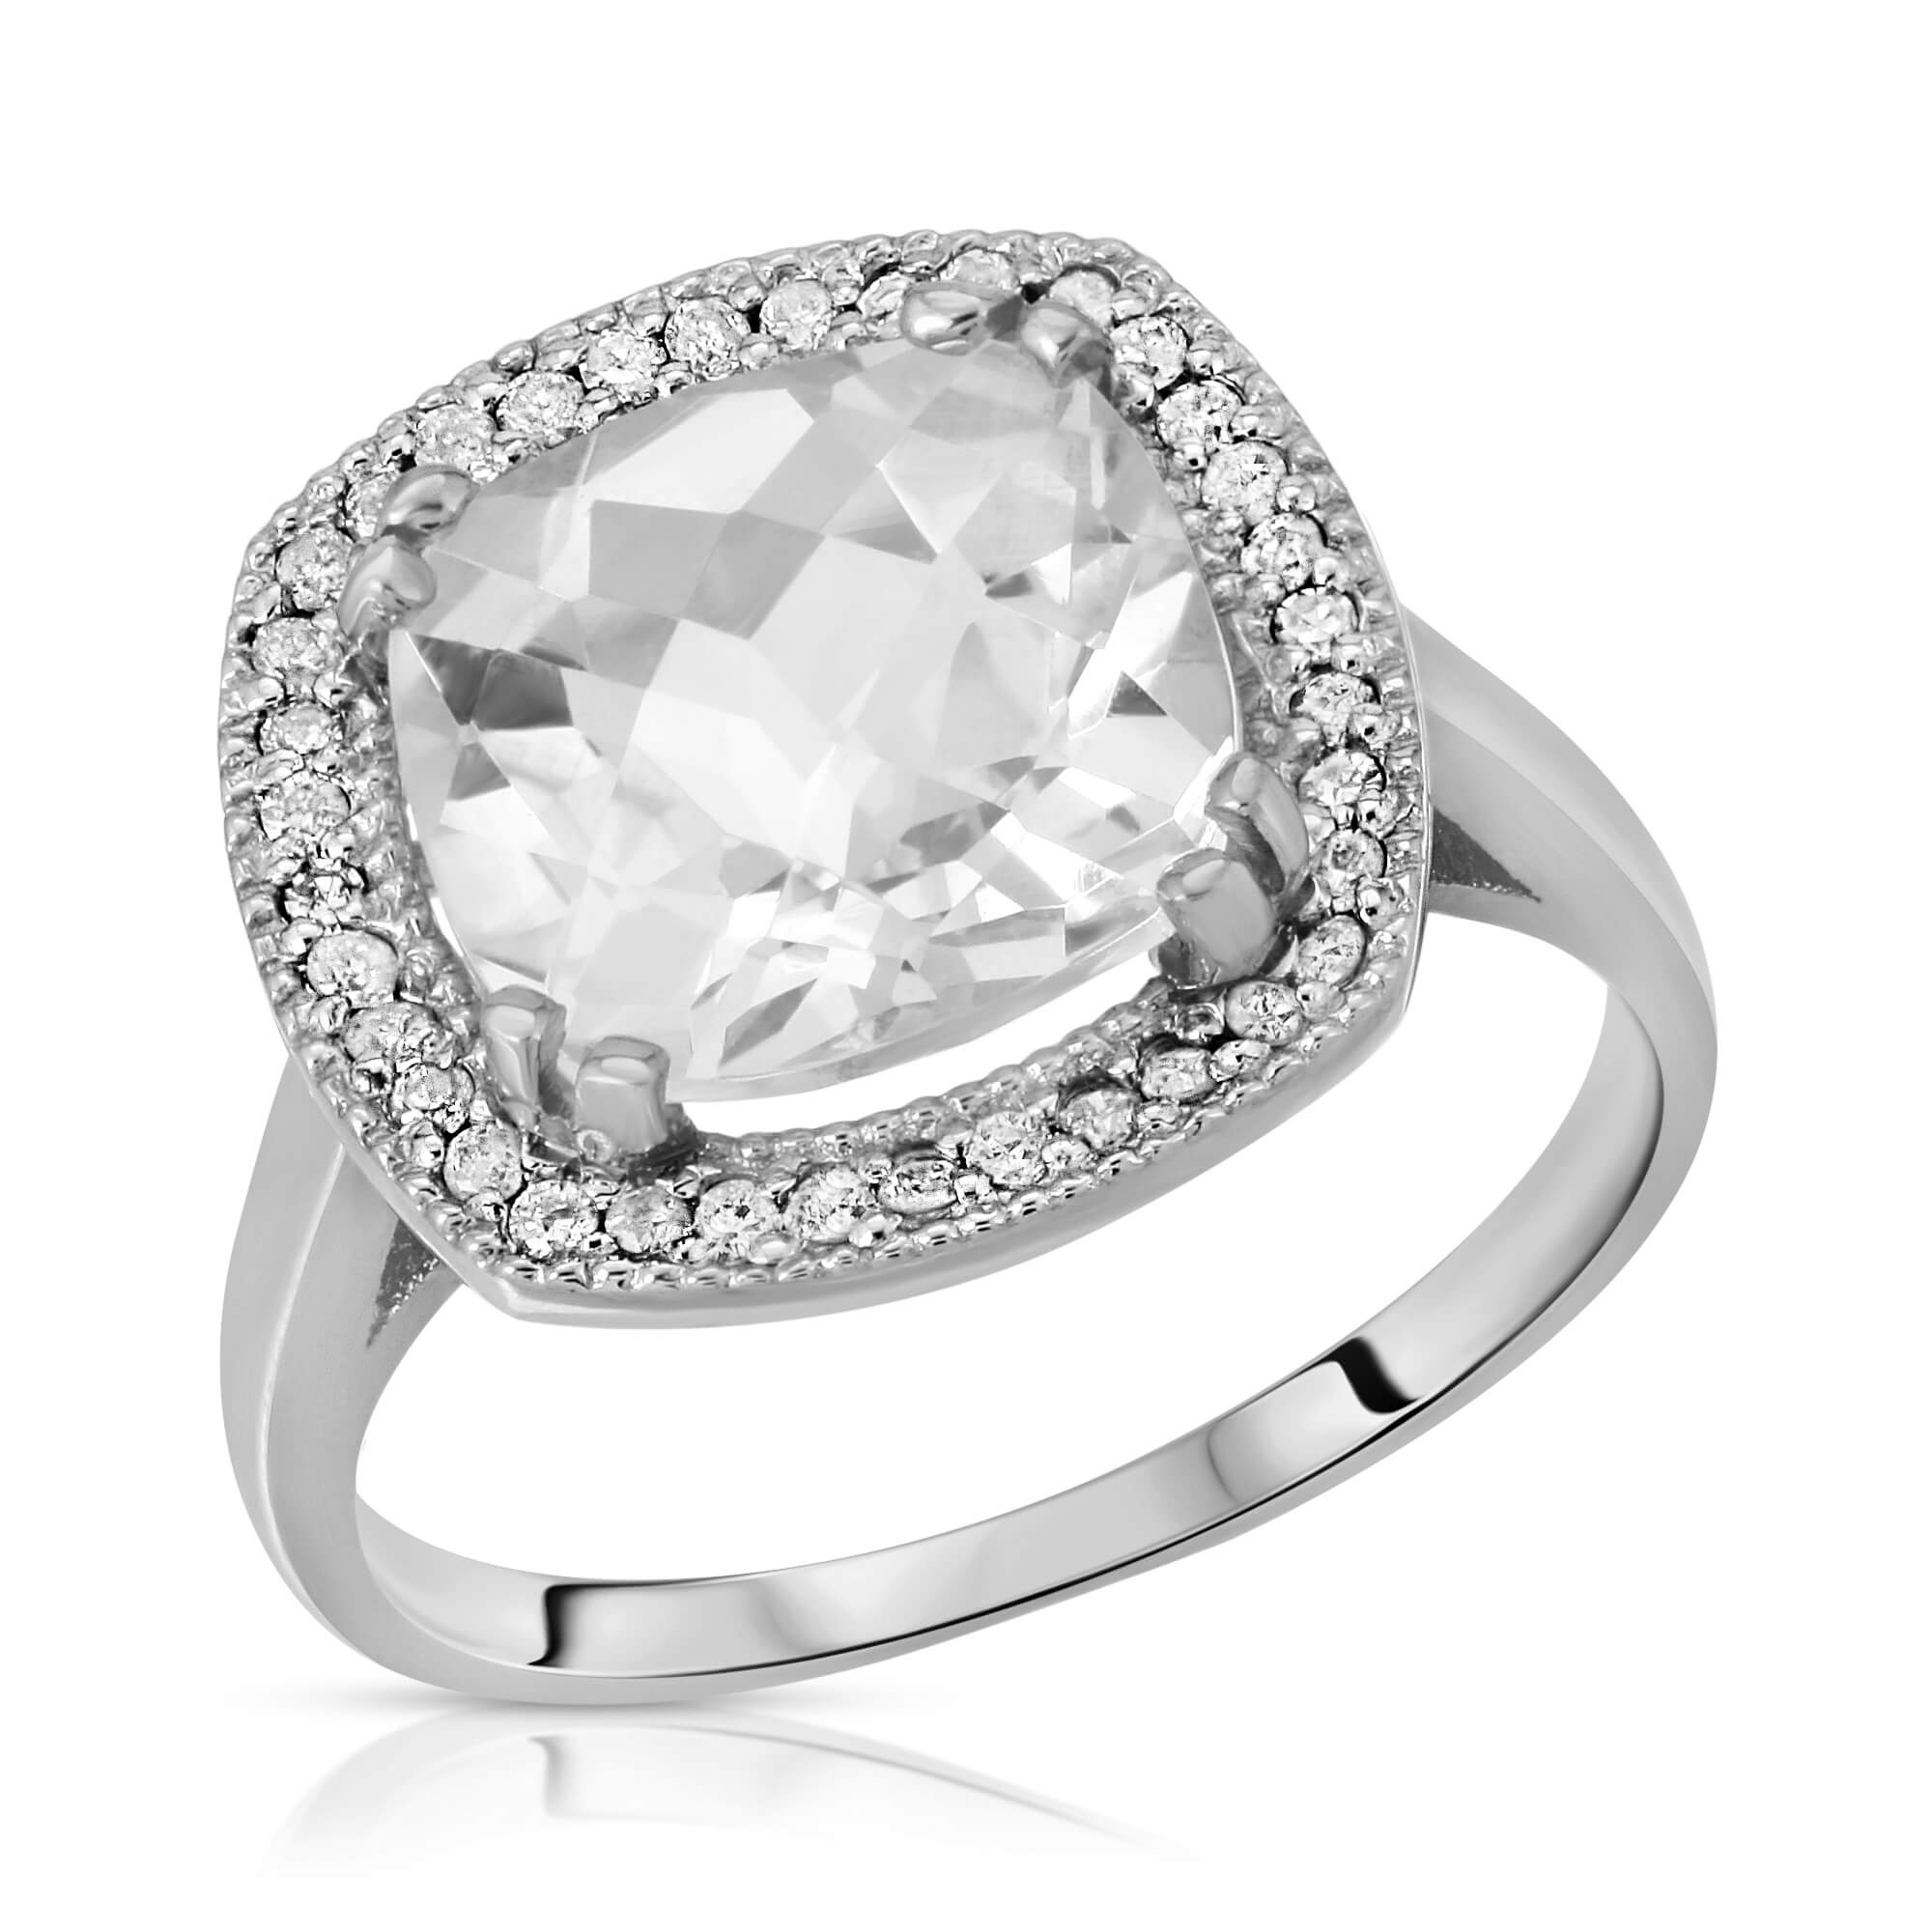 Cushion Cut White Topaz Ring 5.2 ctw in Sterling Silver